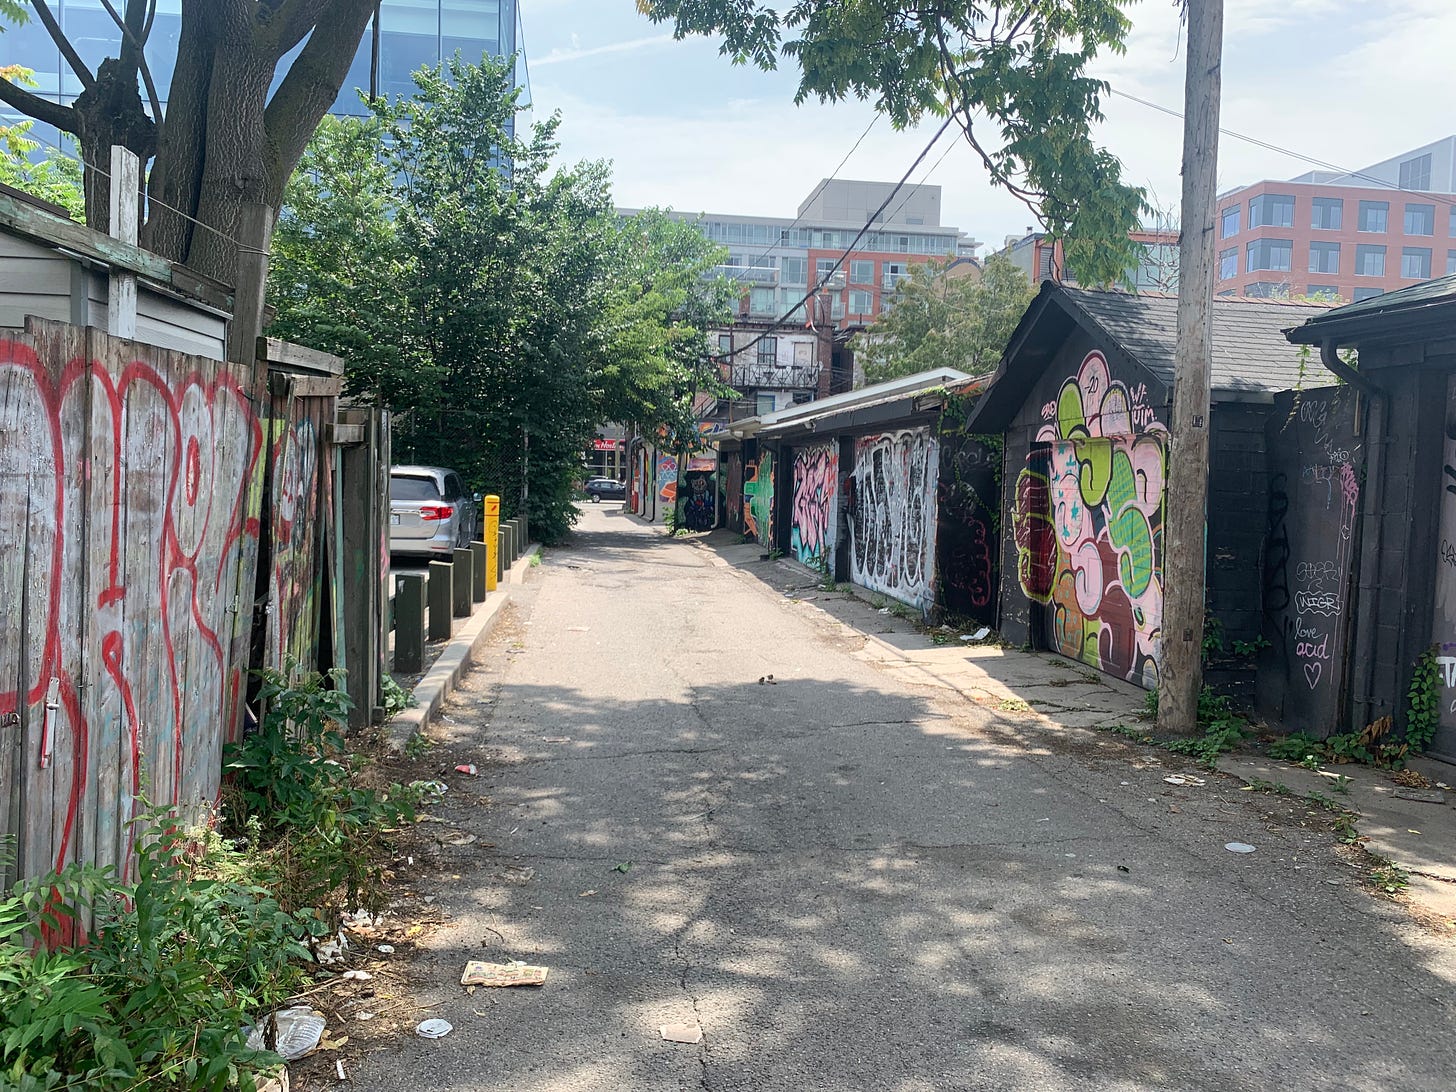 An alley with a row of garages covered in murals and graffiti.